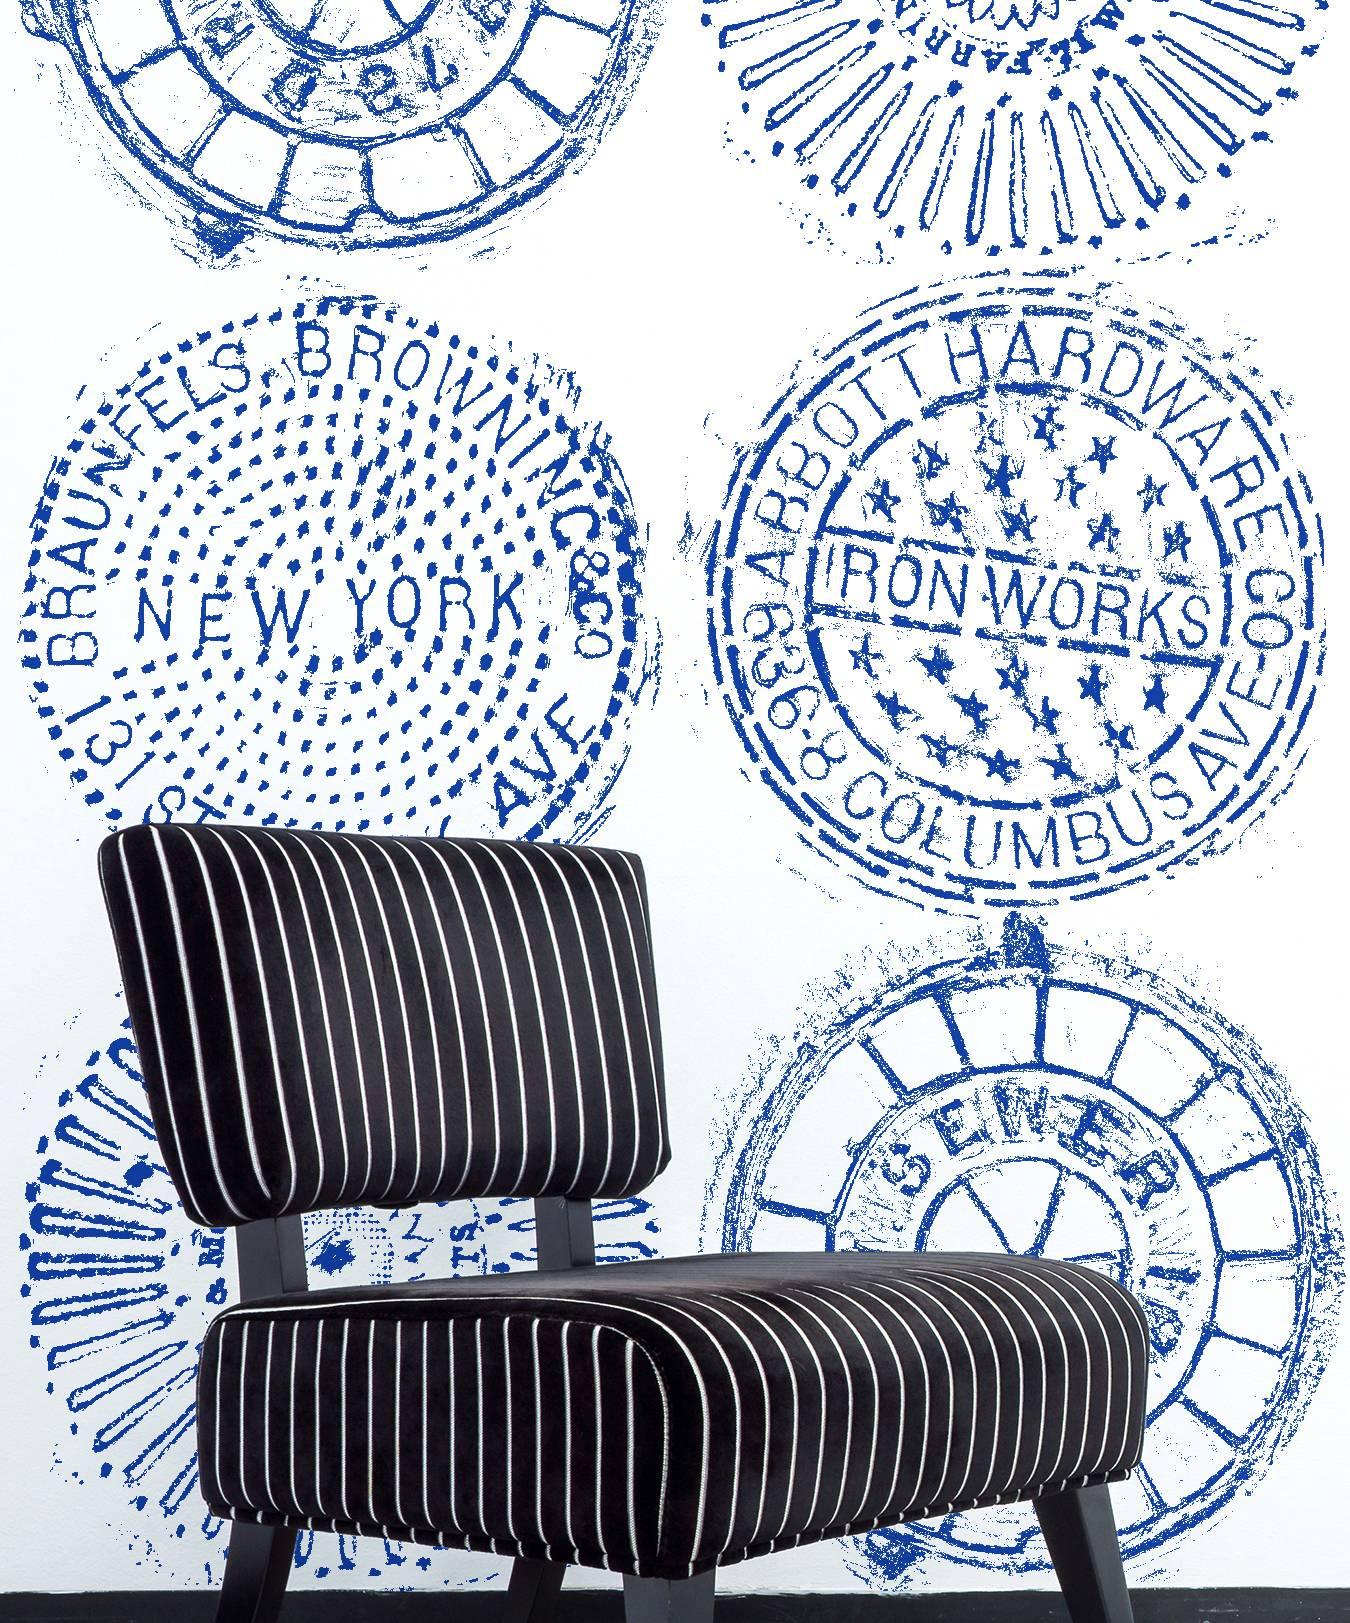 Paper NYC Manhole Printed Wallpaper, Black on White Manhole Cover For Sale